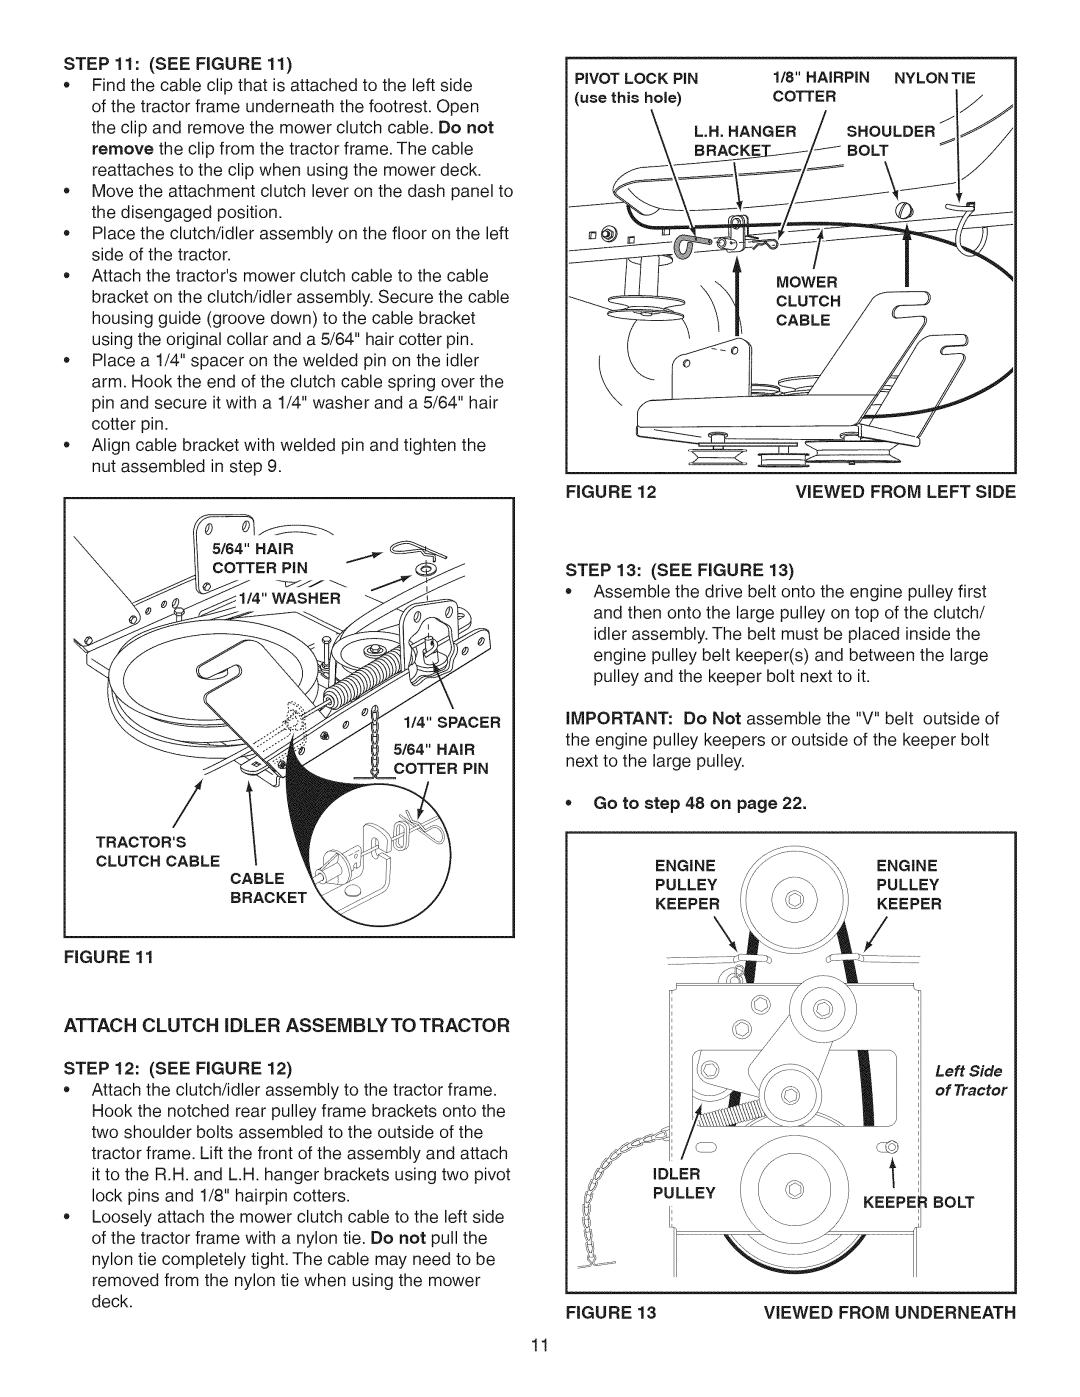 Craftsman 486.24837 manual Tractors, Bracket, ATTACH CLUTCH iDLER ASSEMBLY TO TRACTOR, L.H. Hanger Shoulder, Pulleypulley 